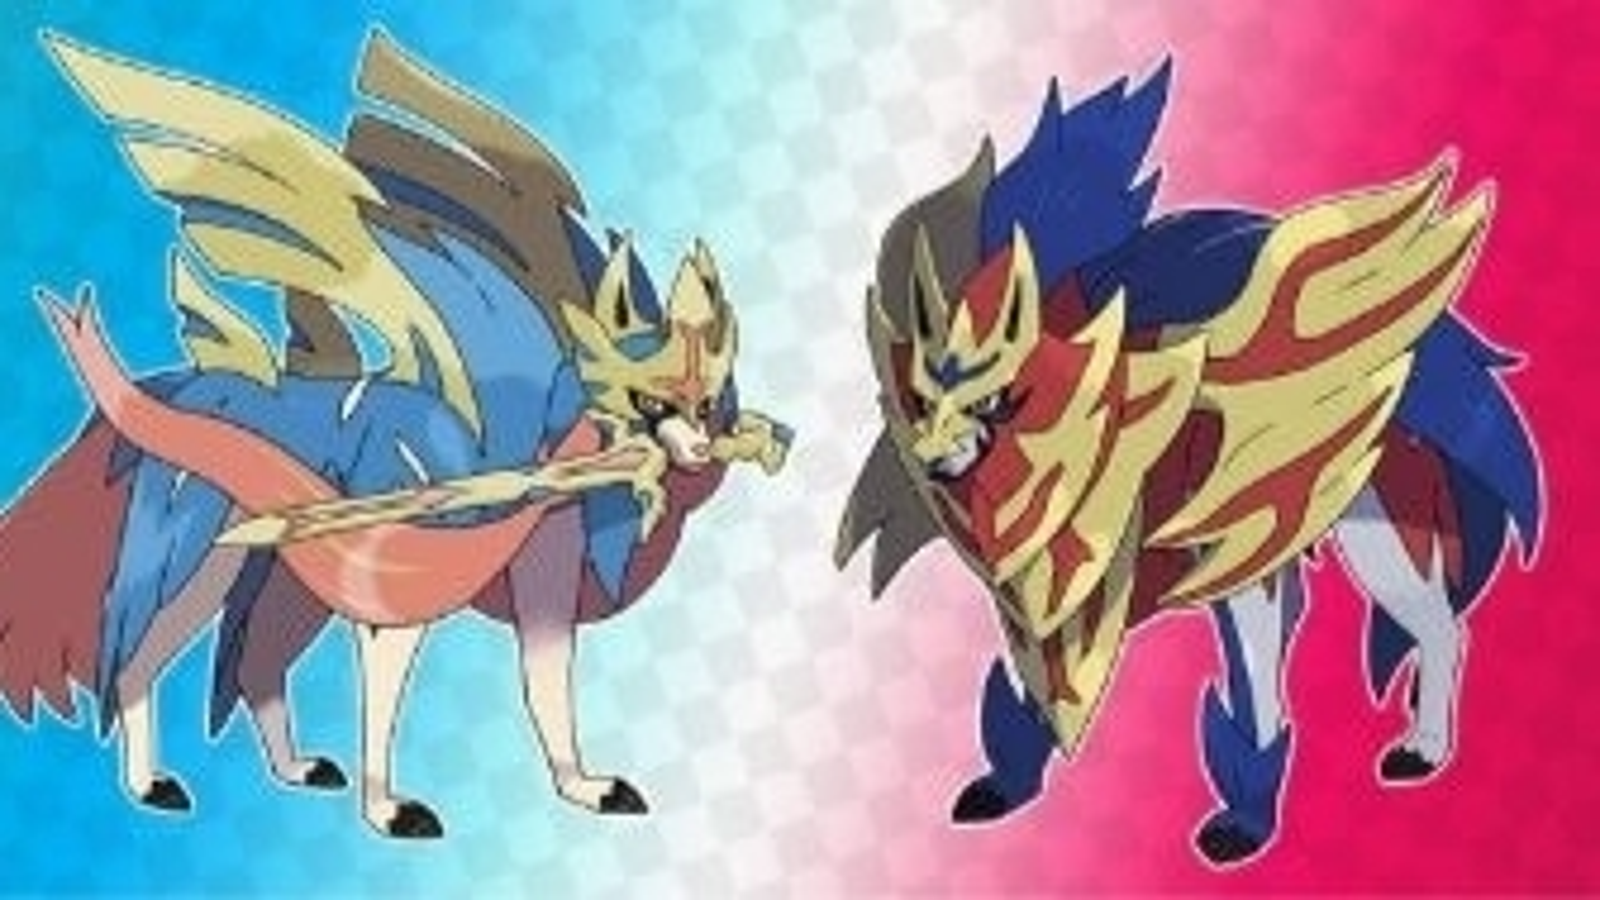 The exclusive Pokémon in Sword and Shield